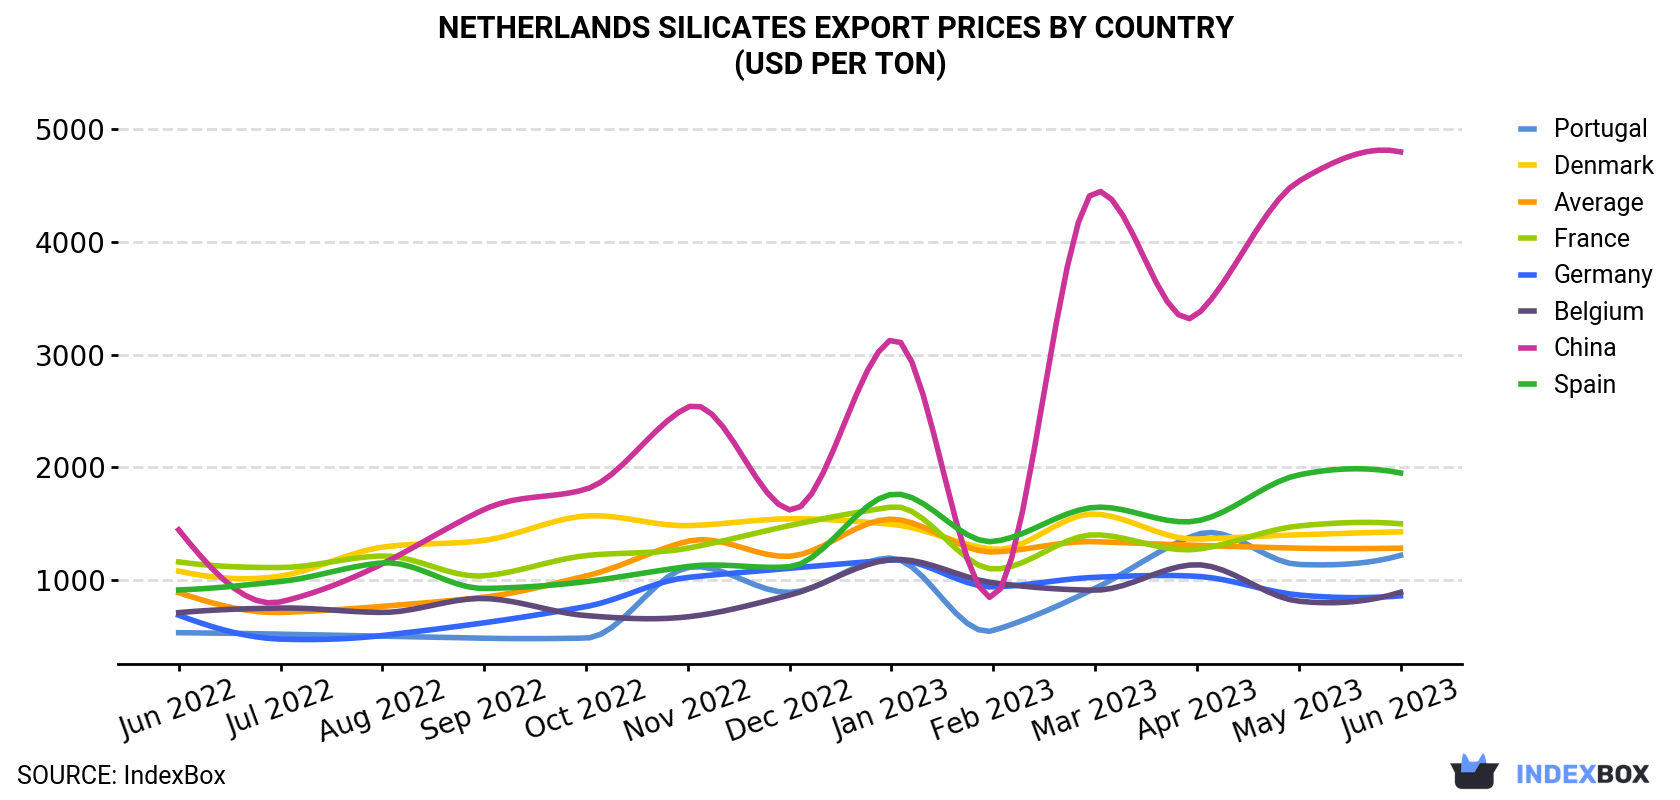 Netherlands Silicates Export Prices By Country (USD Per Ton)